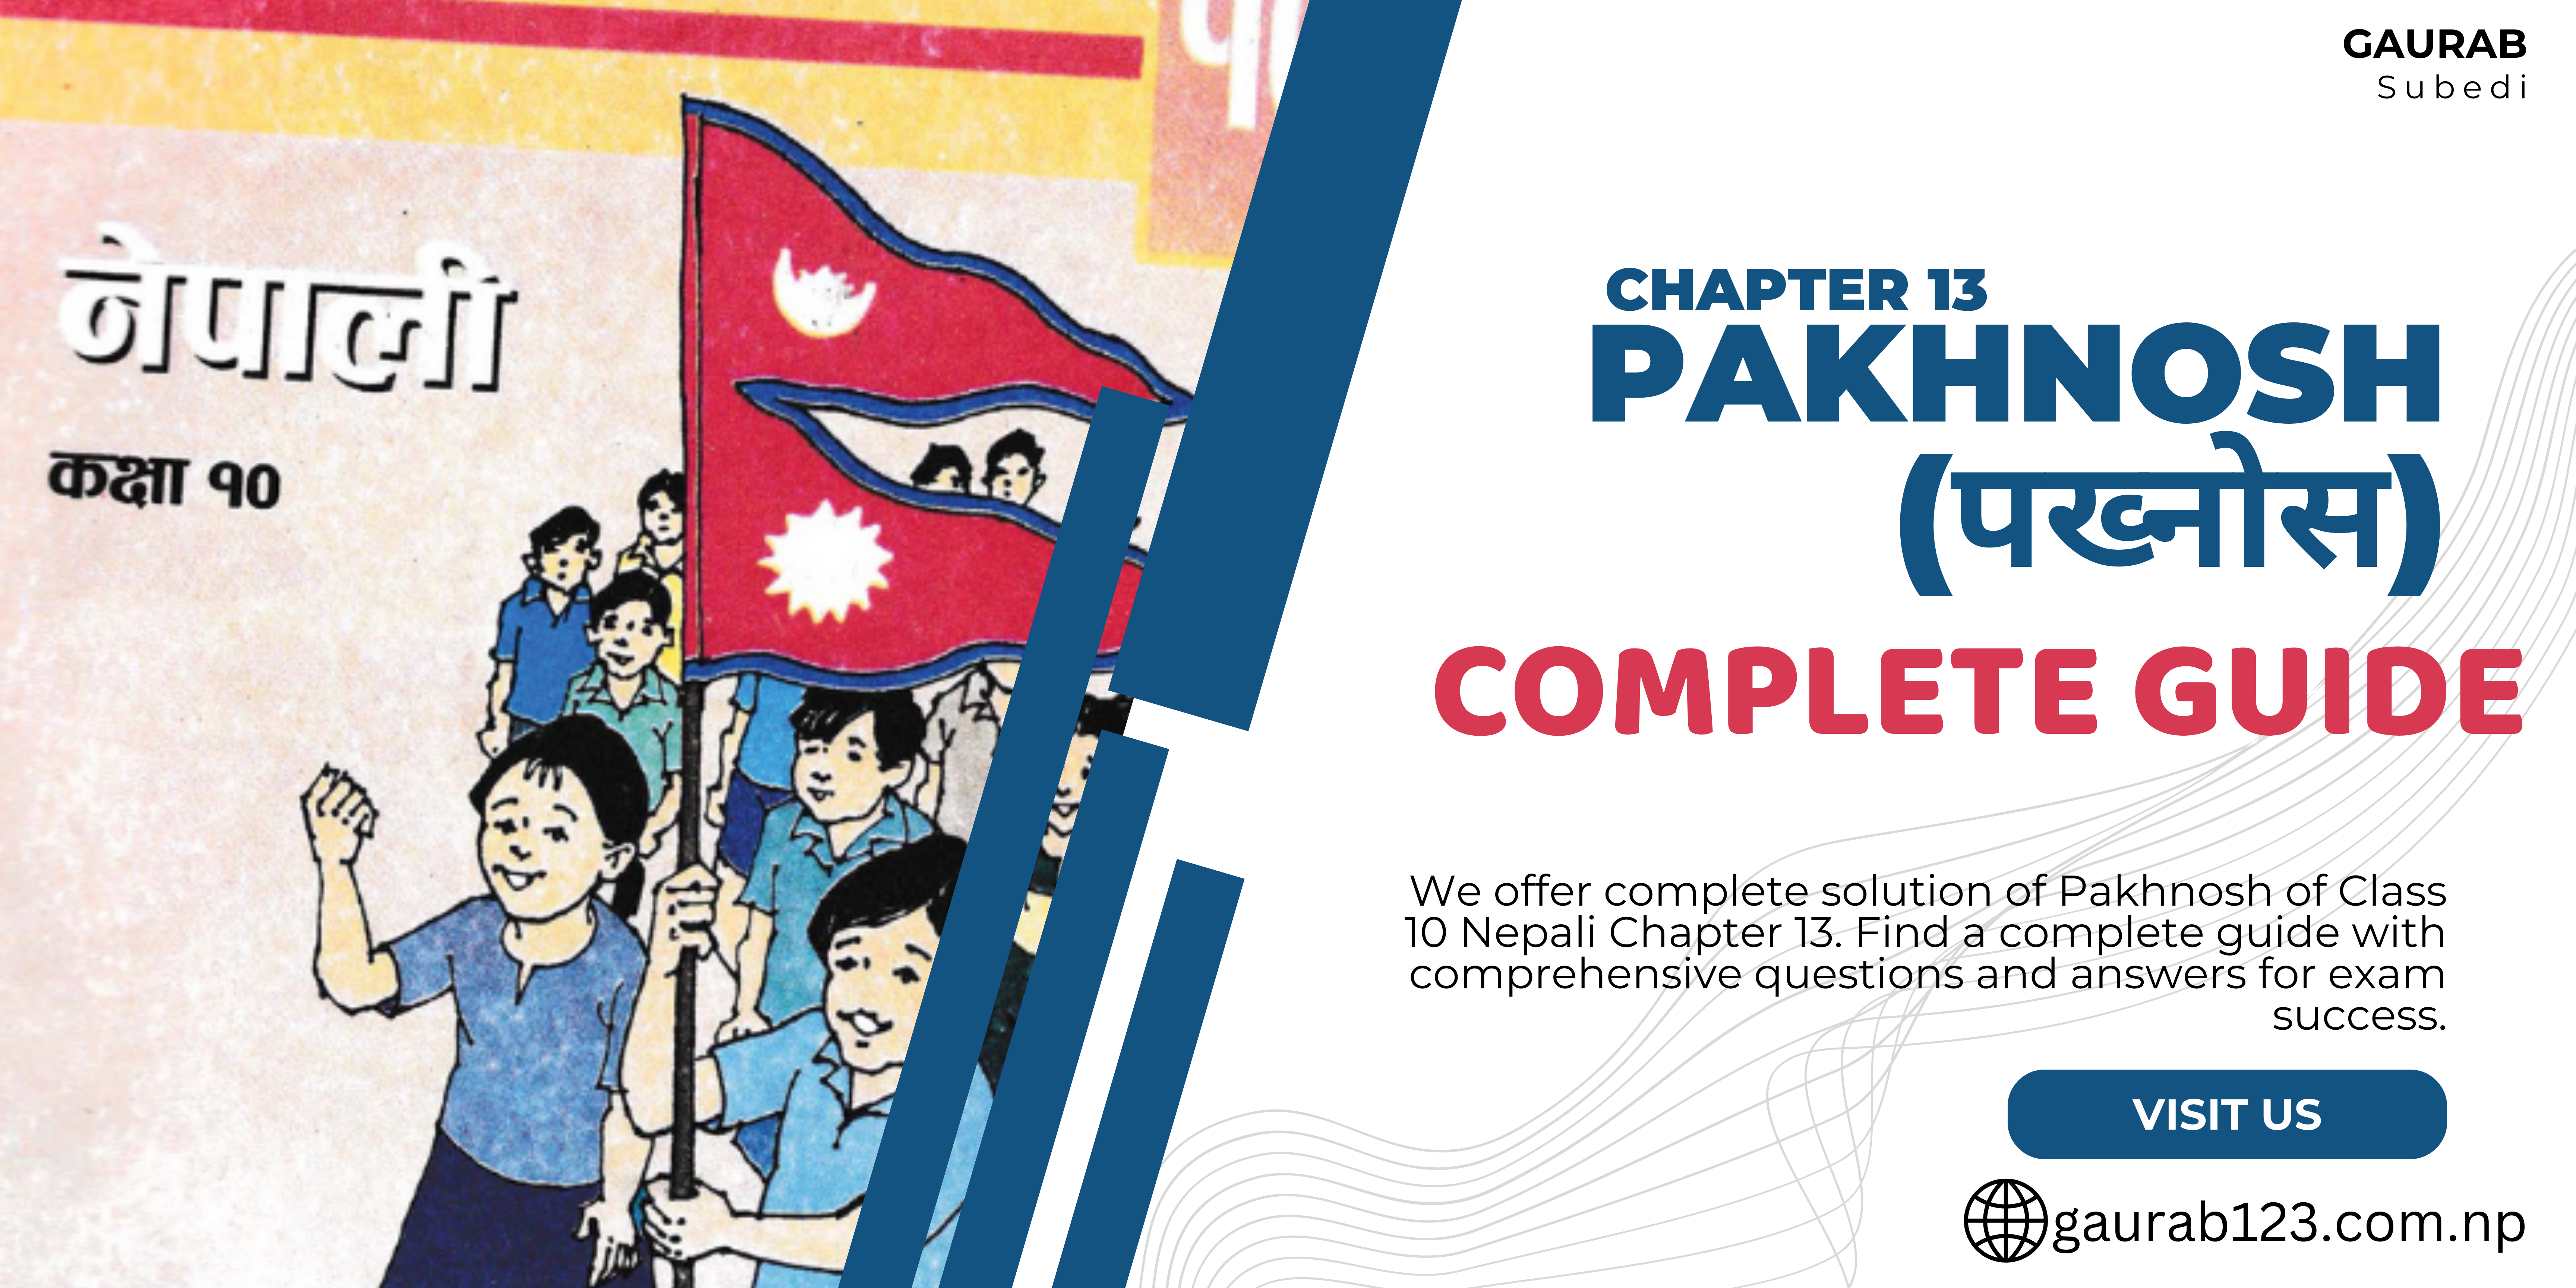 Pakhnosh: Class 10 Nepali Chapter 13 Complete Guide